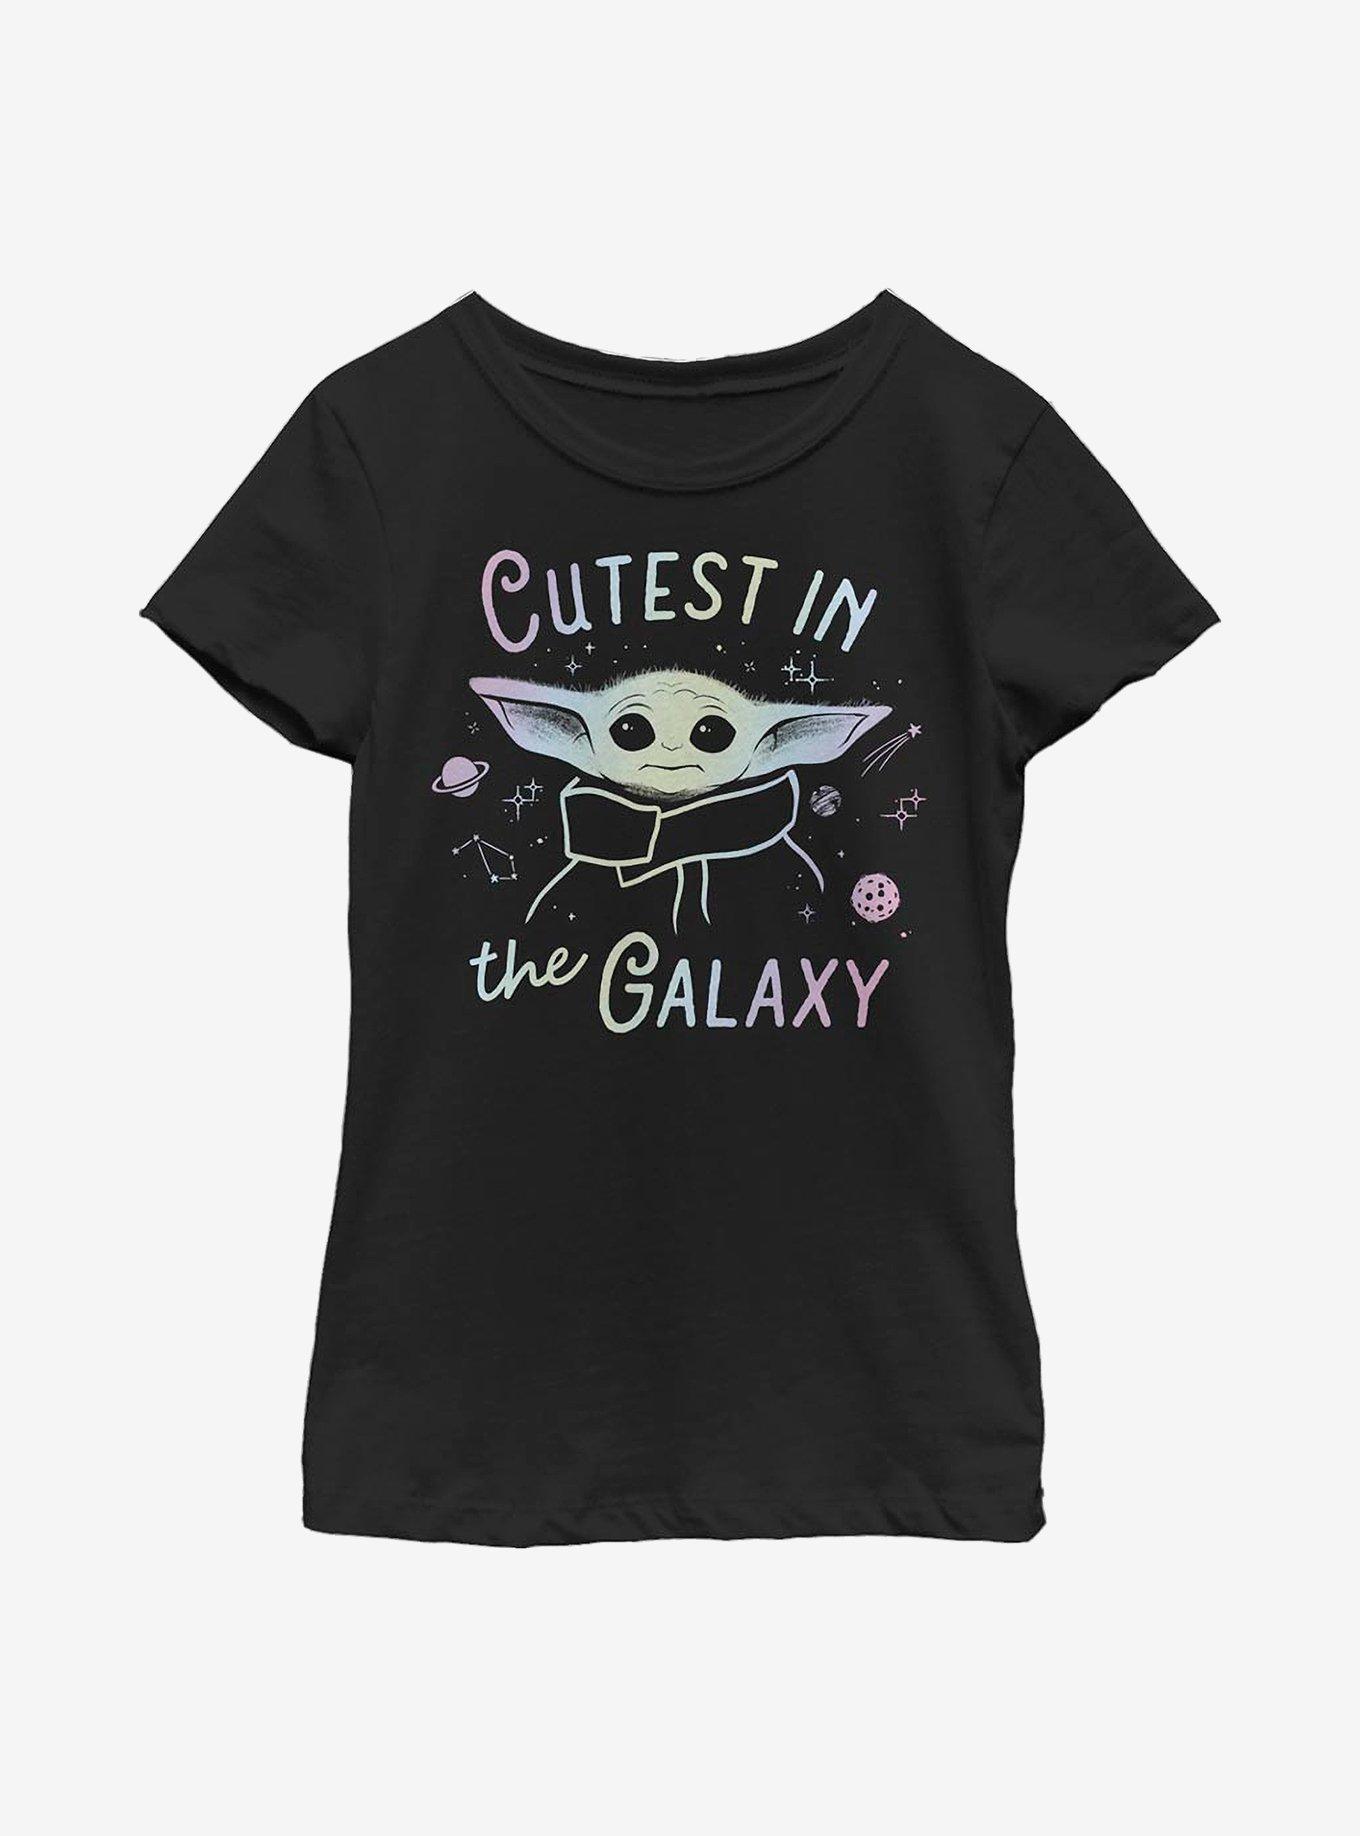 Star Wars The Mandalorian The Child Cutest in The Galaxy Youth Girls T-Shirt, , hi-res